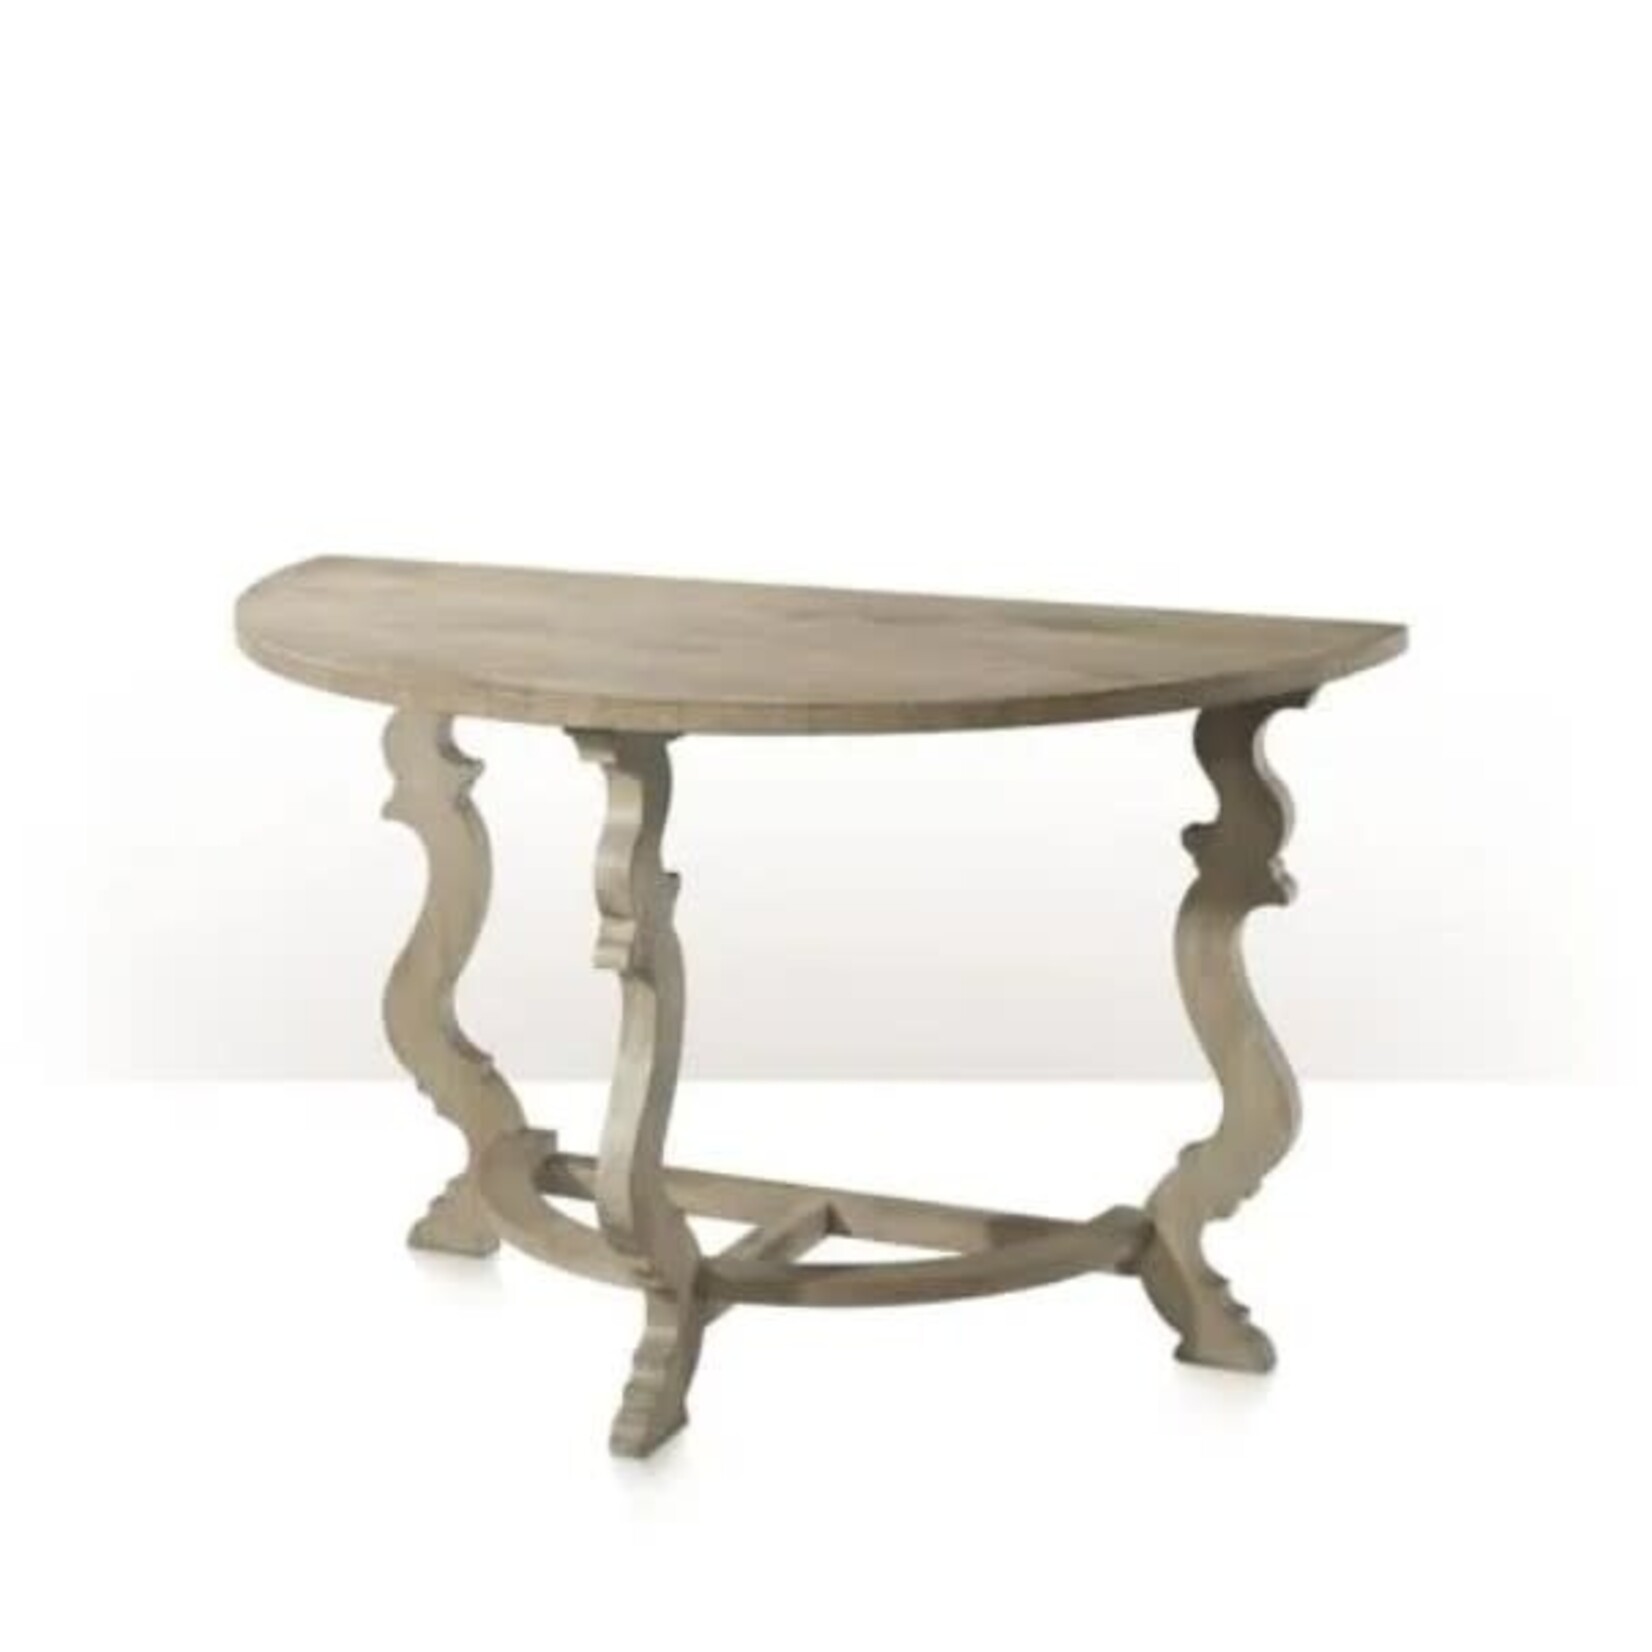 Theodore Alexander English Joiner Table